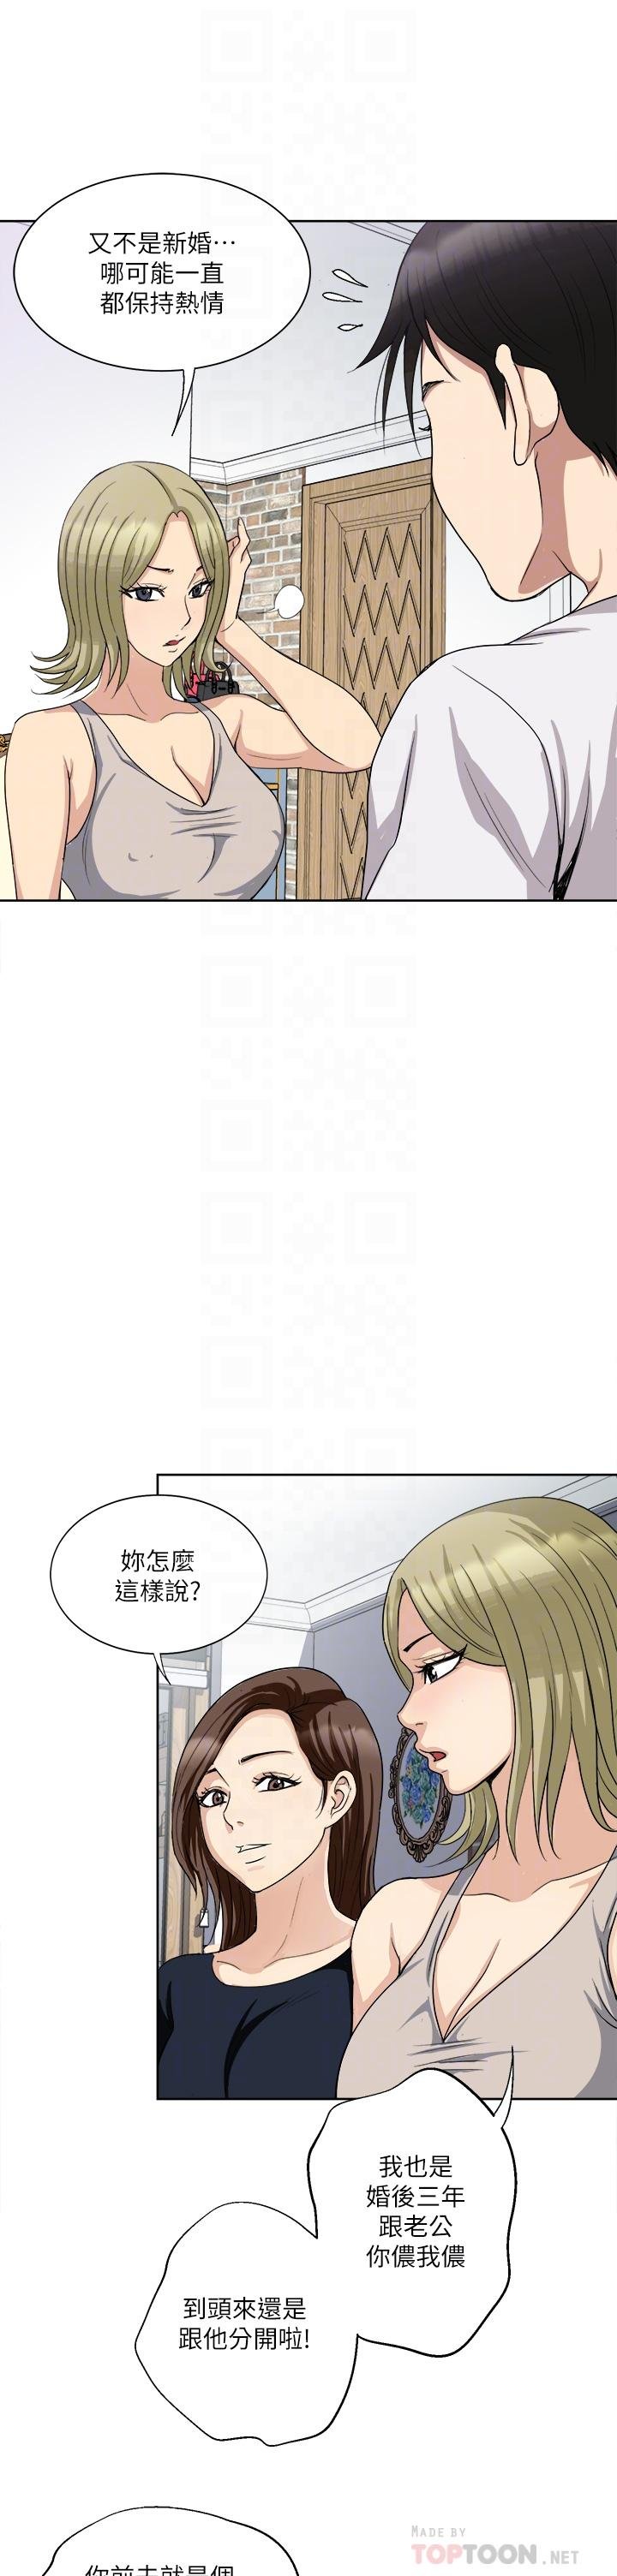 just-once-raw-chap-3-17